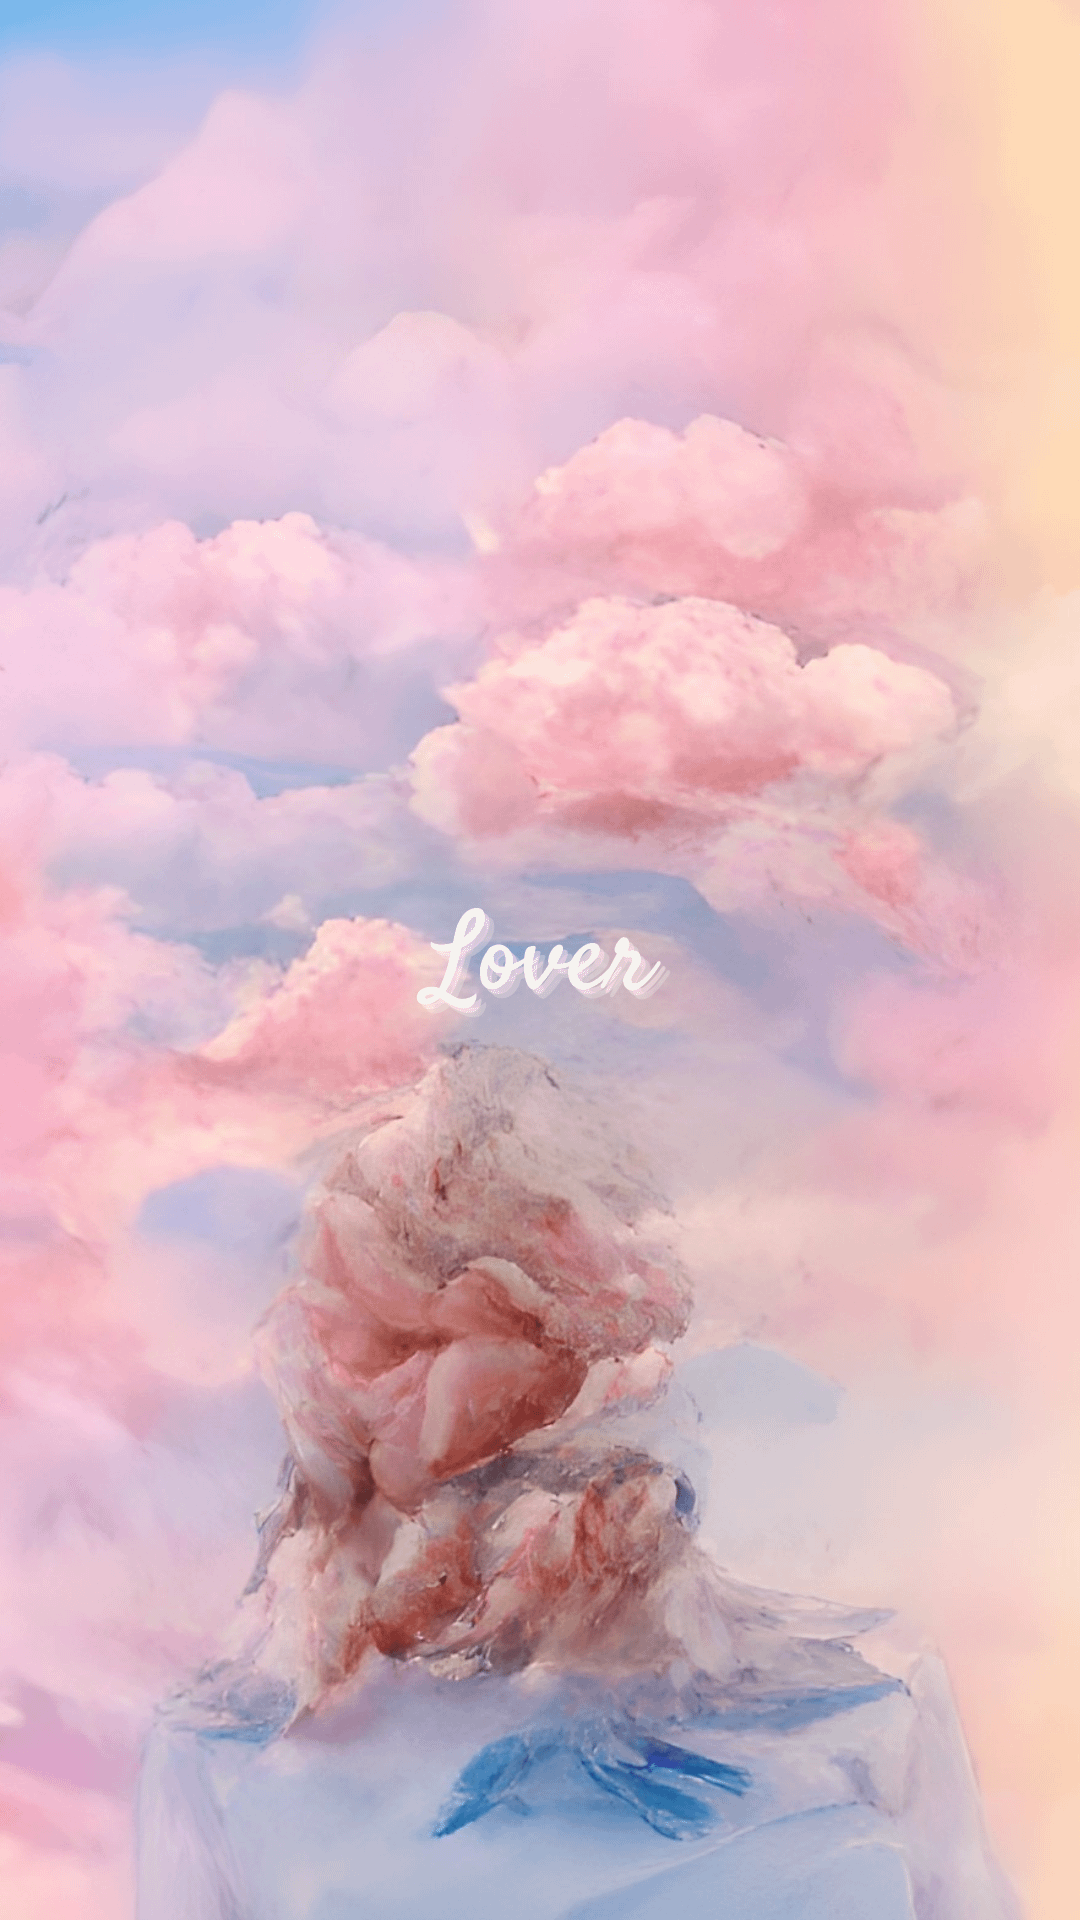 A digital art piece of a woman's back with the word Lover written in the sky - Taylor Swift